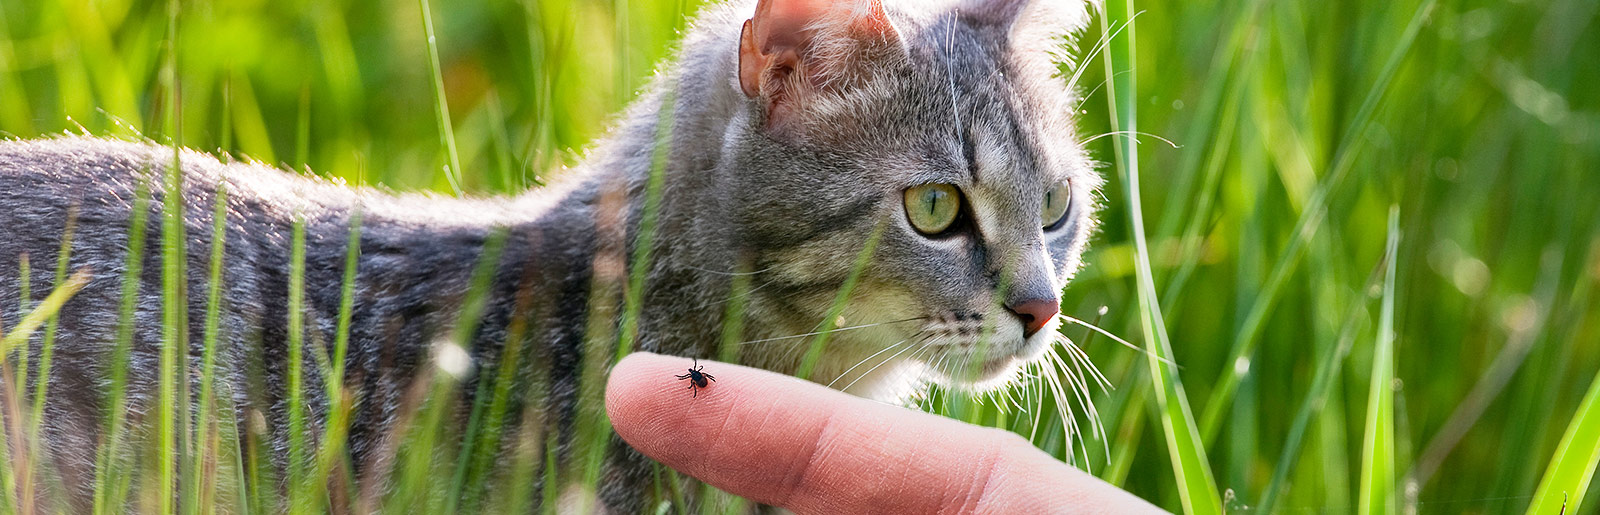 Ticks in cats: How to remove them properly